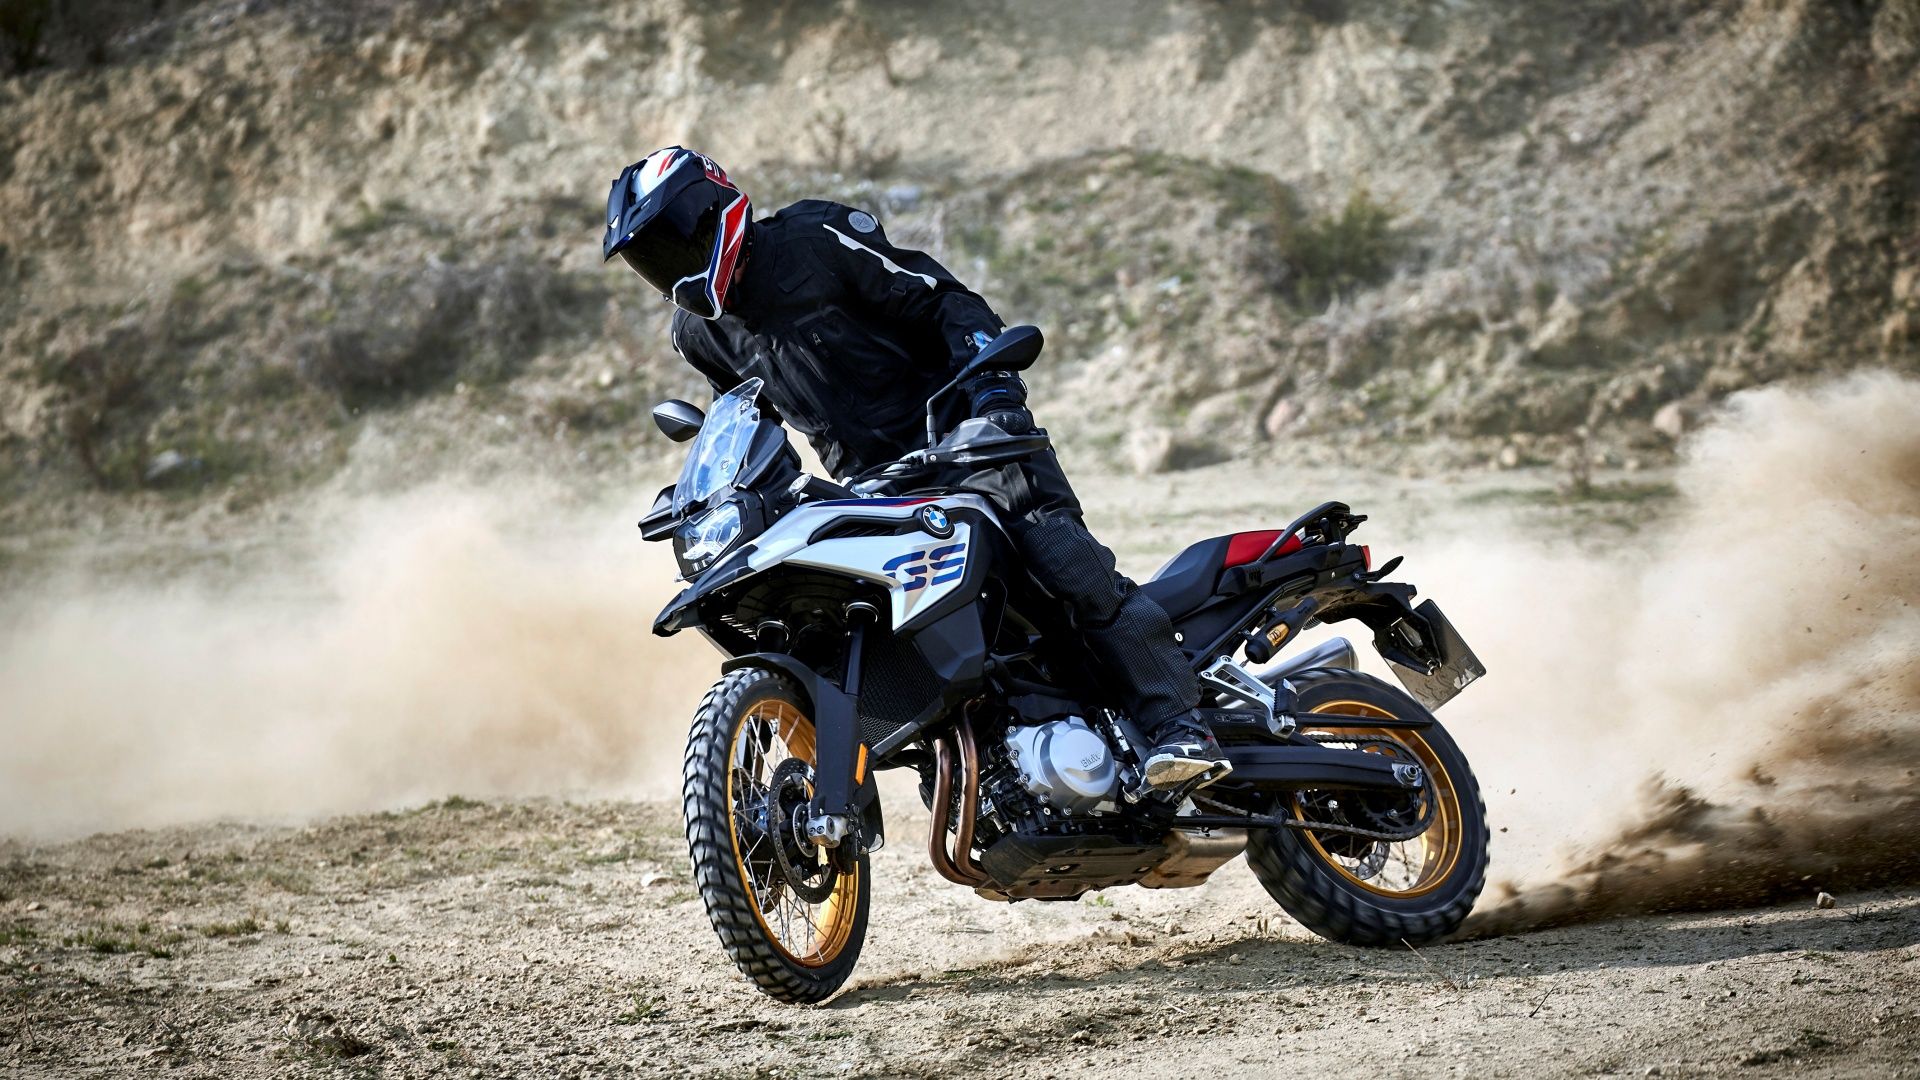 An action shot of a BMW F 850 GS riding off-road